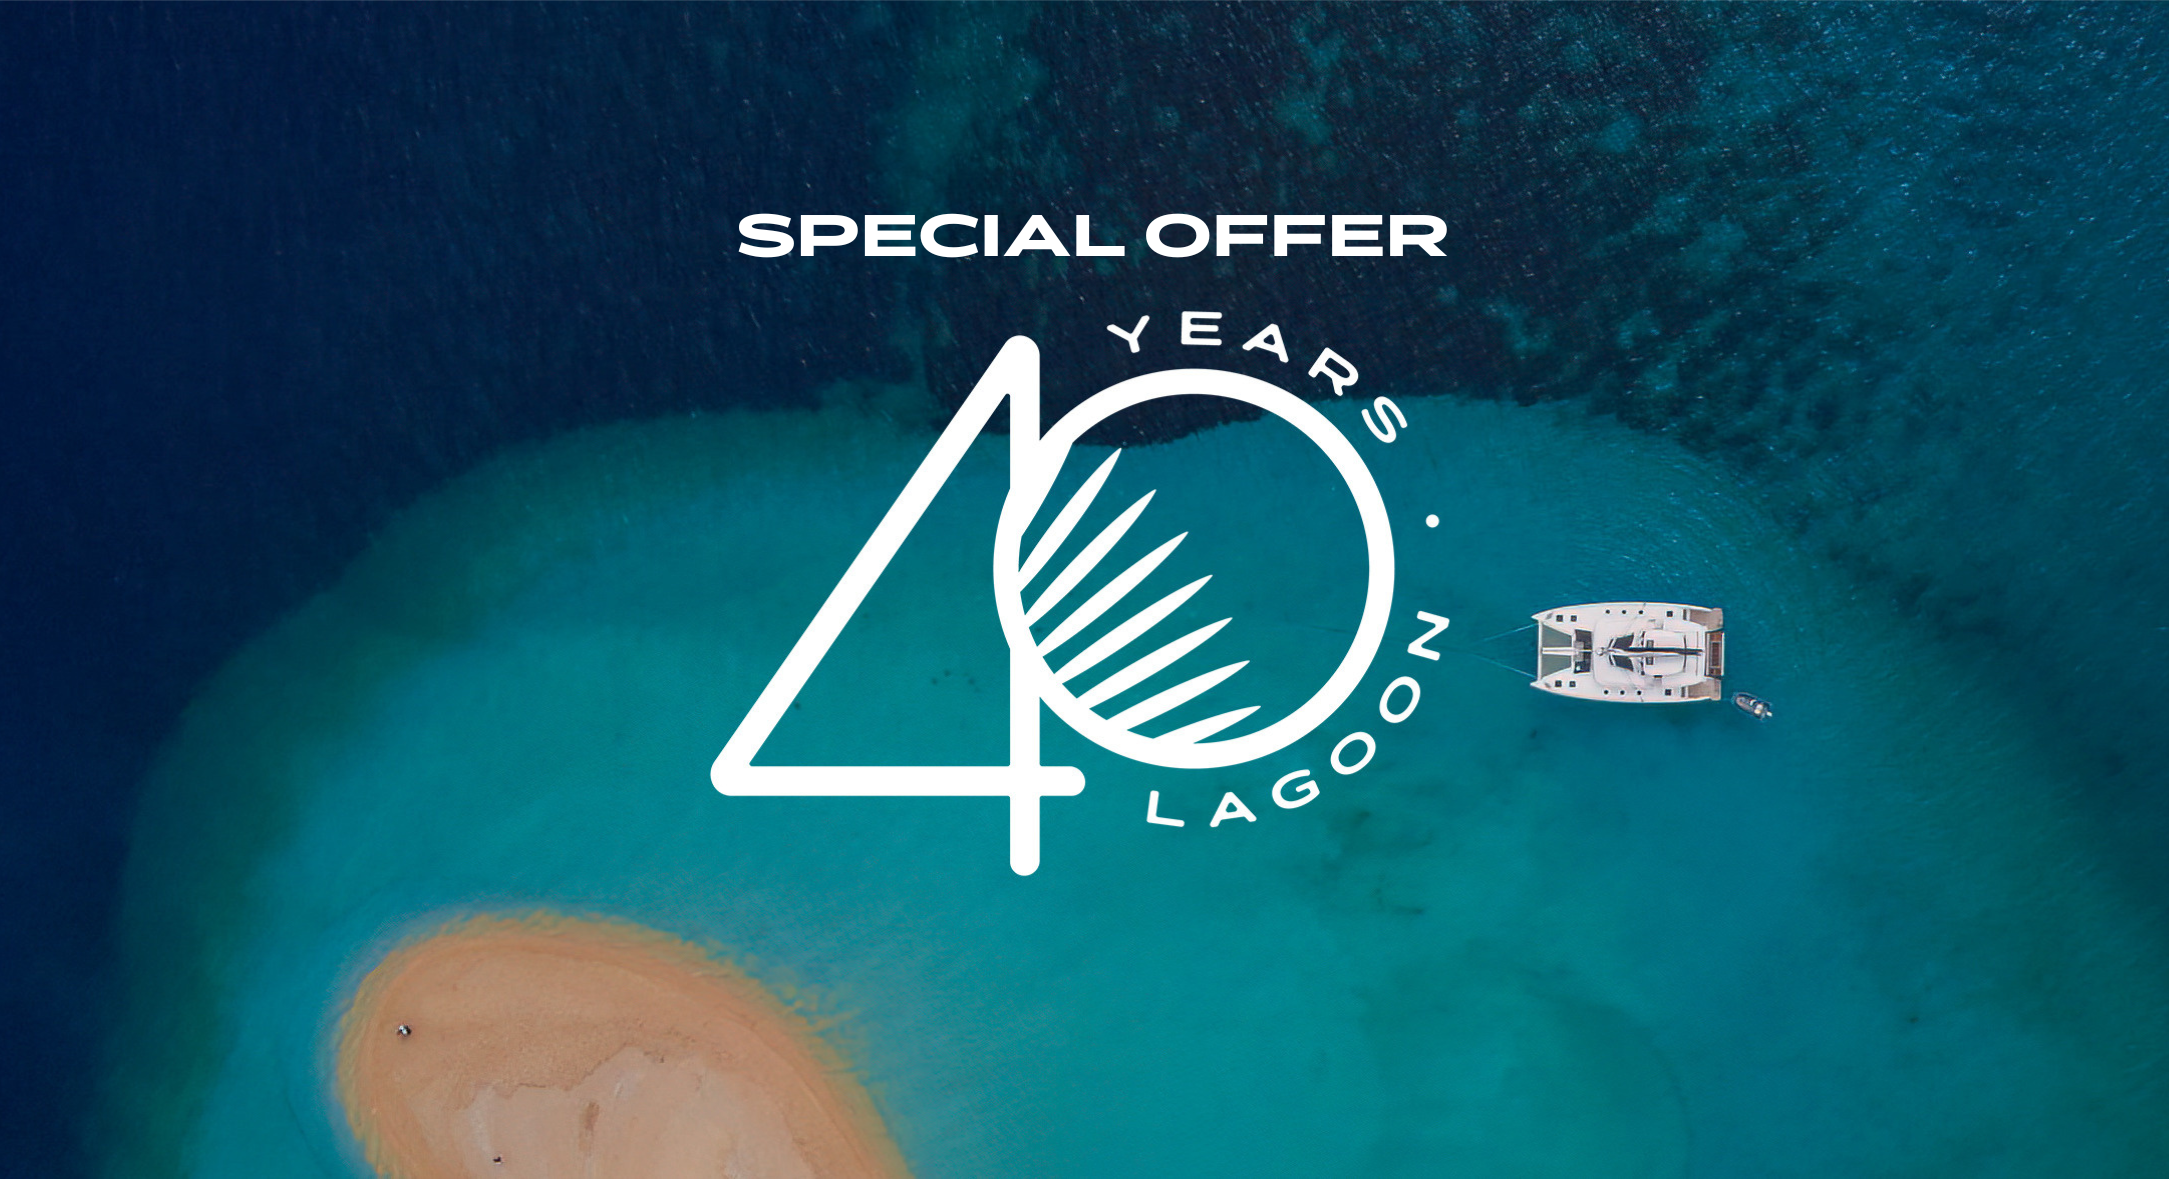 Lagoon 40th Anniversary Special Offer